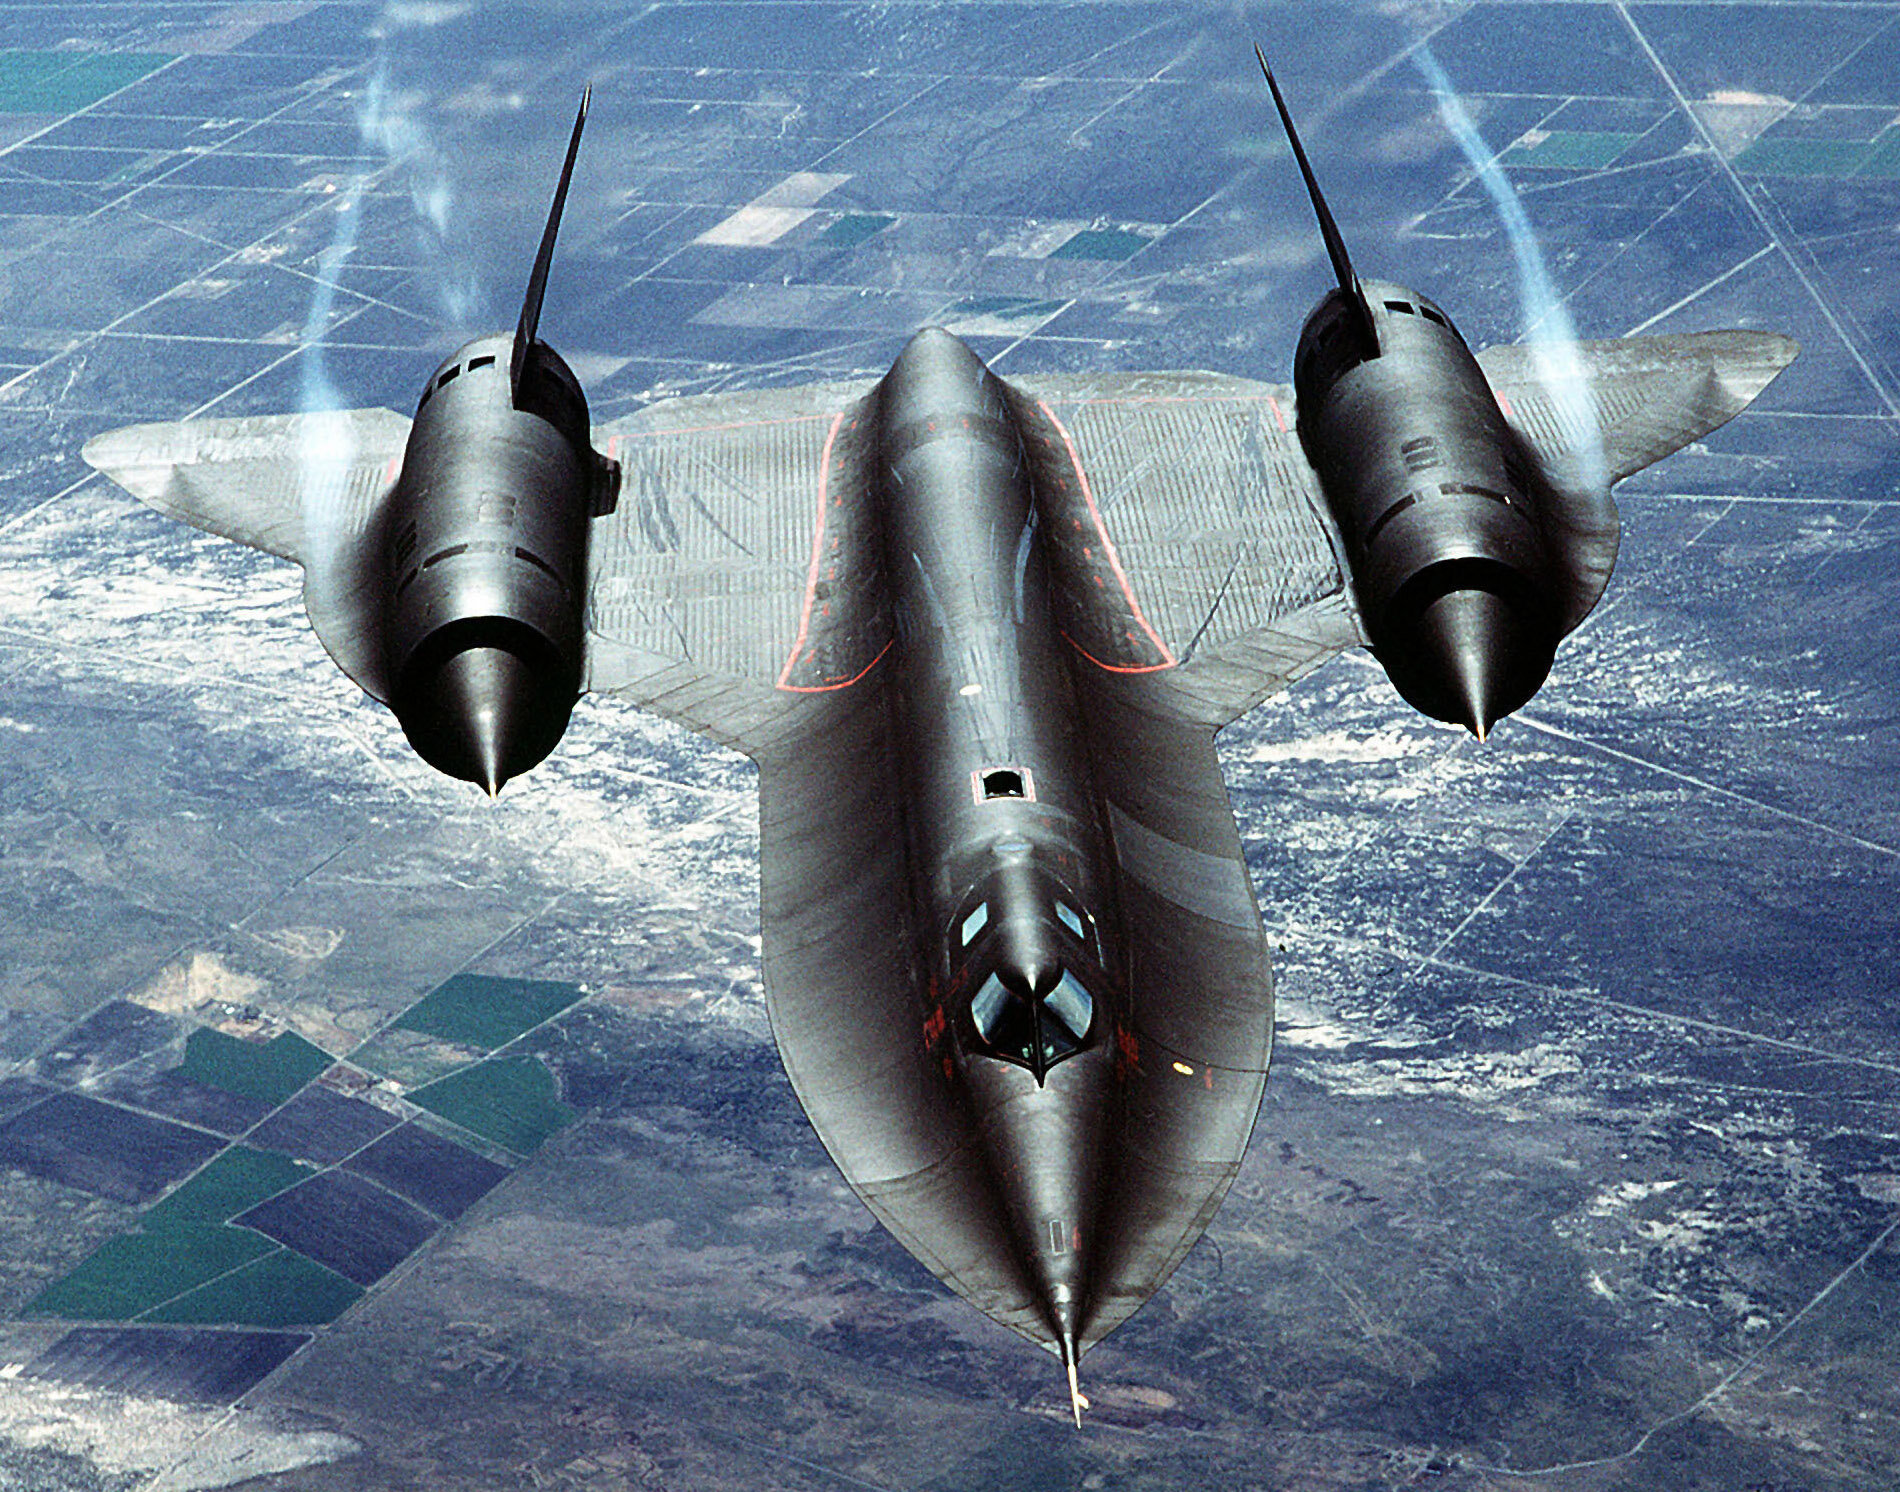   The SR-71, unofficially known as the "Blackbird," is a long-range, advanced, strategic reconnaissance aircraft developed from the Lockheed A-12 and YF-12A aircraft. (TSgt Michael Haggerty/USAF/Wikimedia)  